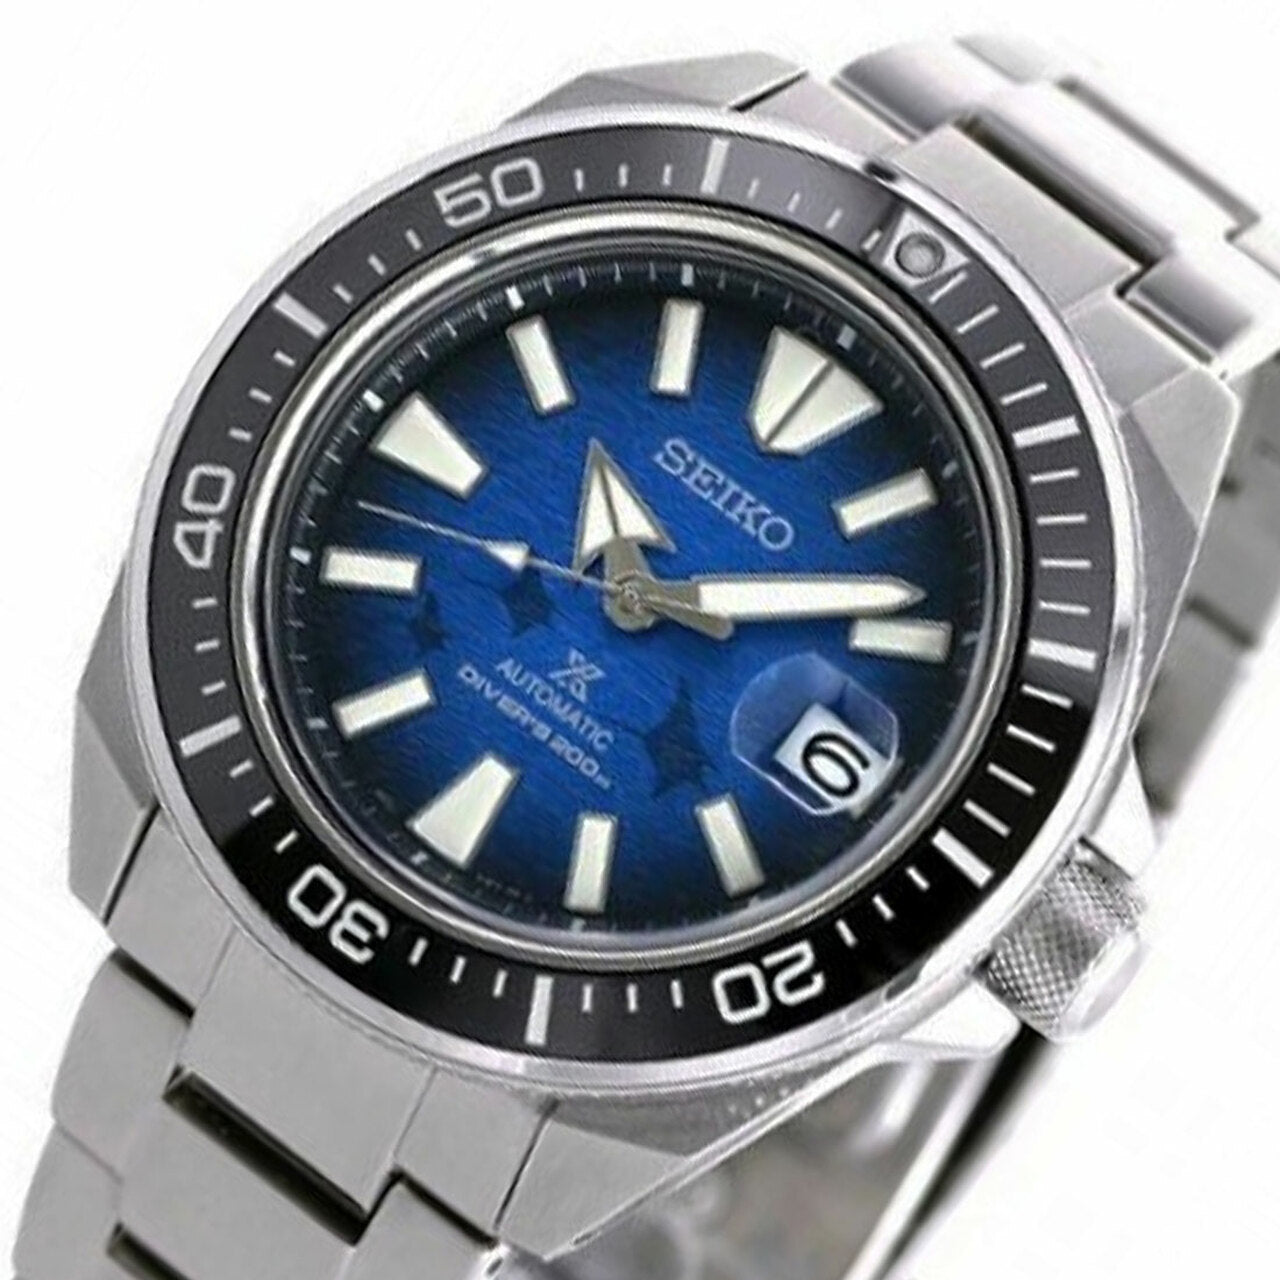 Seiko SRPE33K1 Prospex Diver Save the Ocean Automatic Watch-Watch Portal Philippines